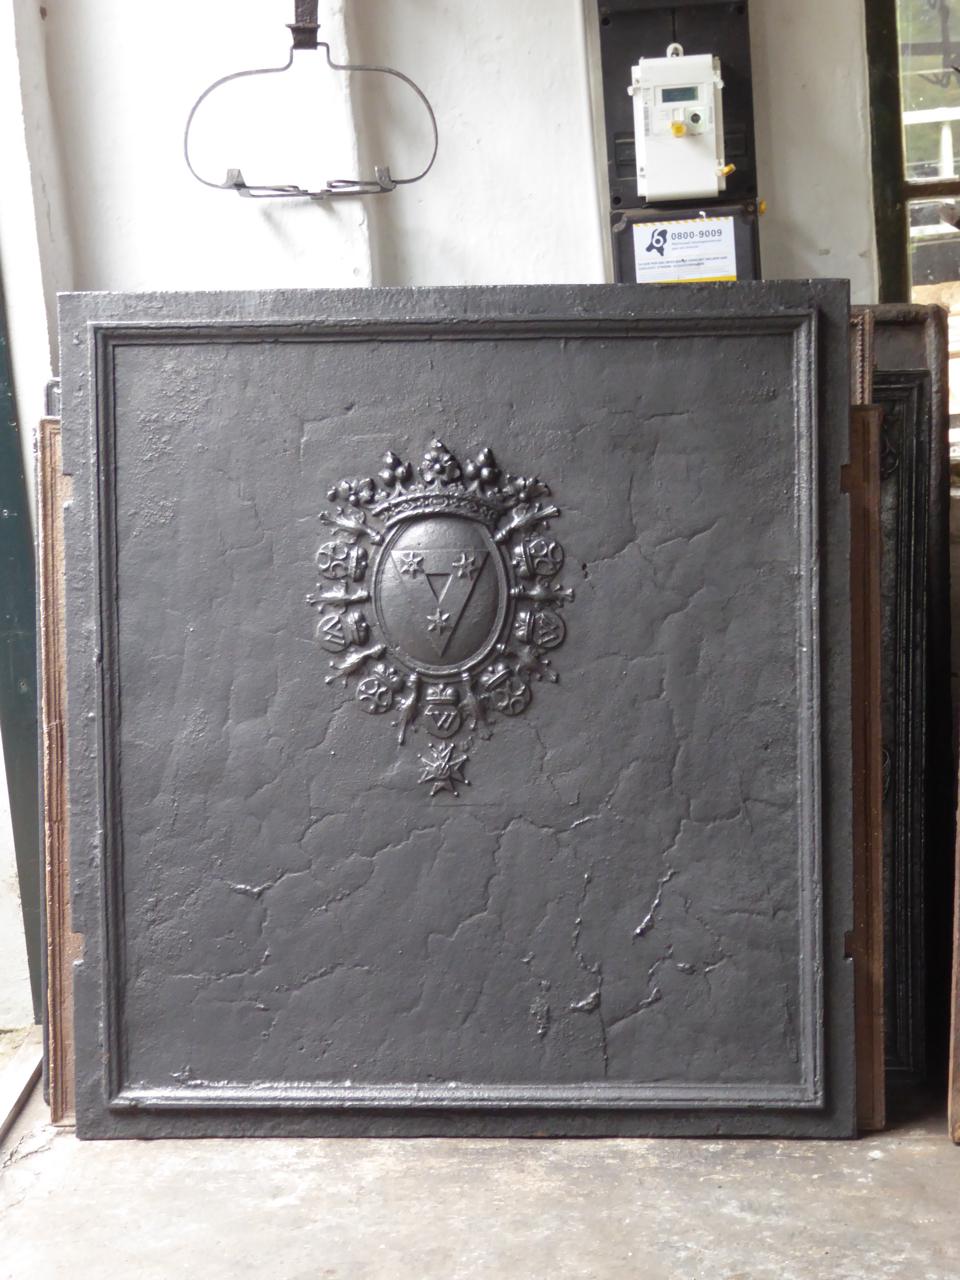 Magnificent 17th-18th century French Louis XIV fireback with an unknown coat of arms. The crown symbolizes royalty.

All our products that weigh 66 kg / 146 lbs or more are shipped as standard door-to-door freight. The prices of freight have